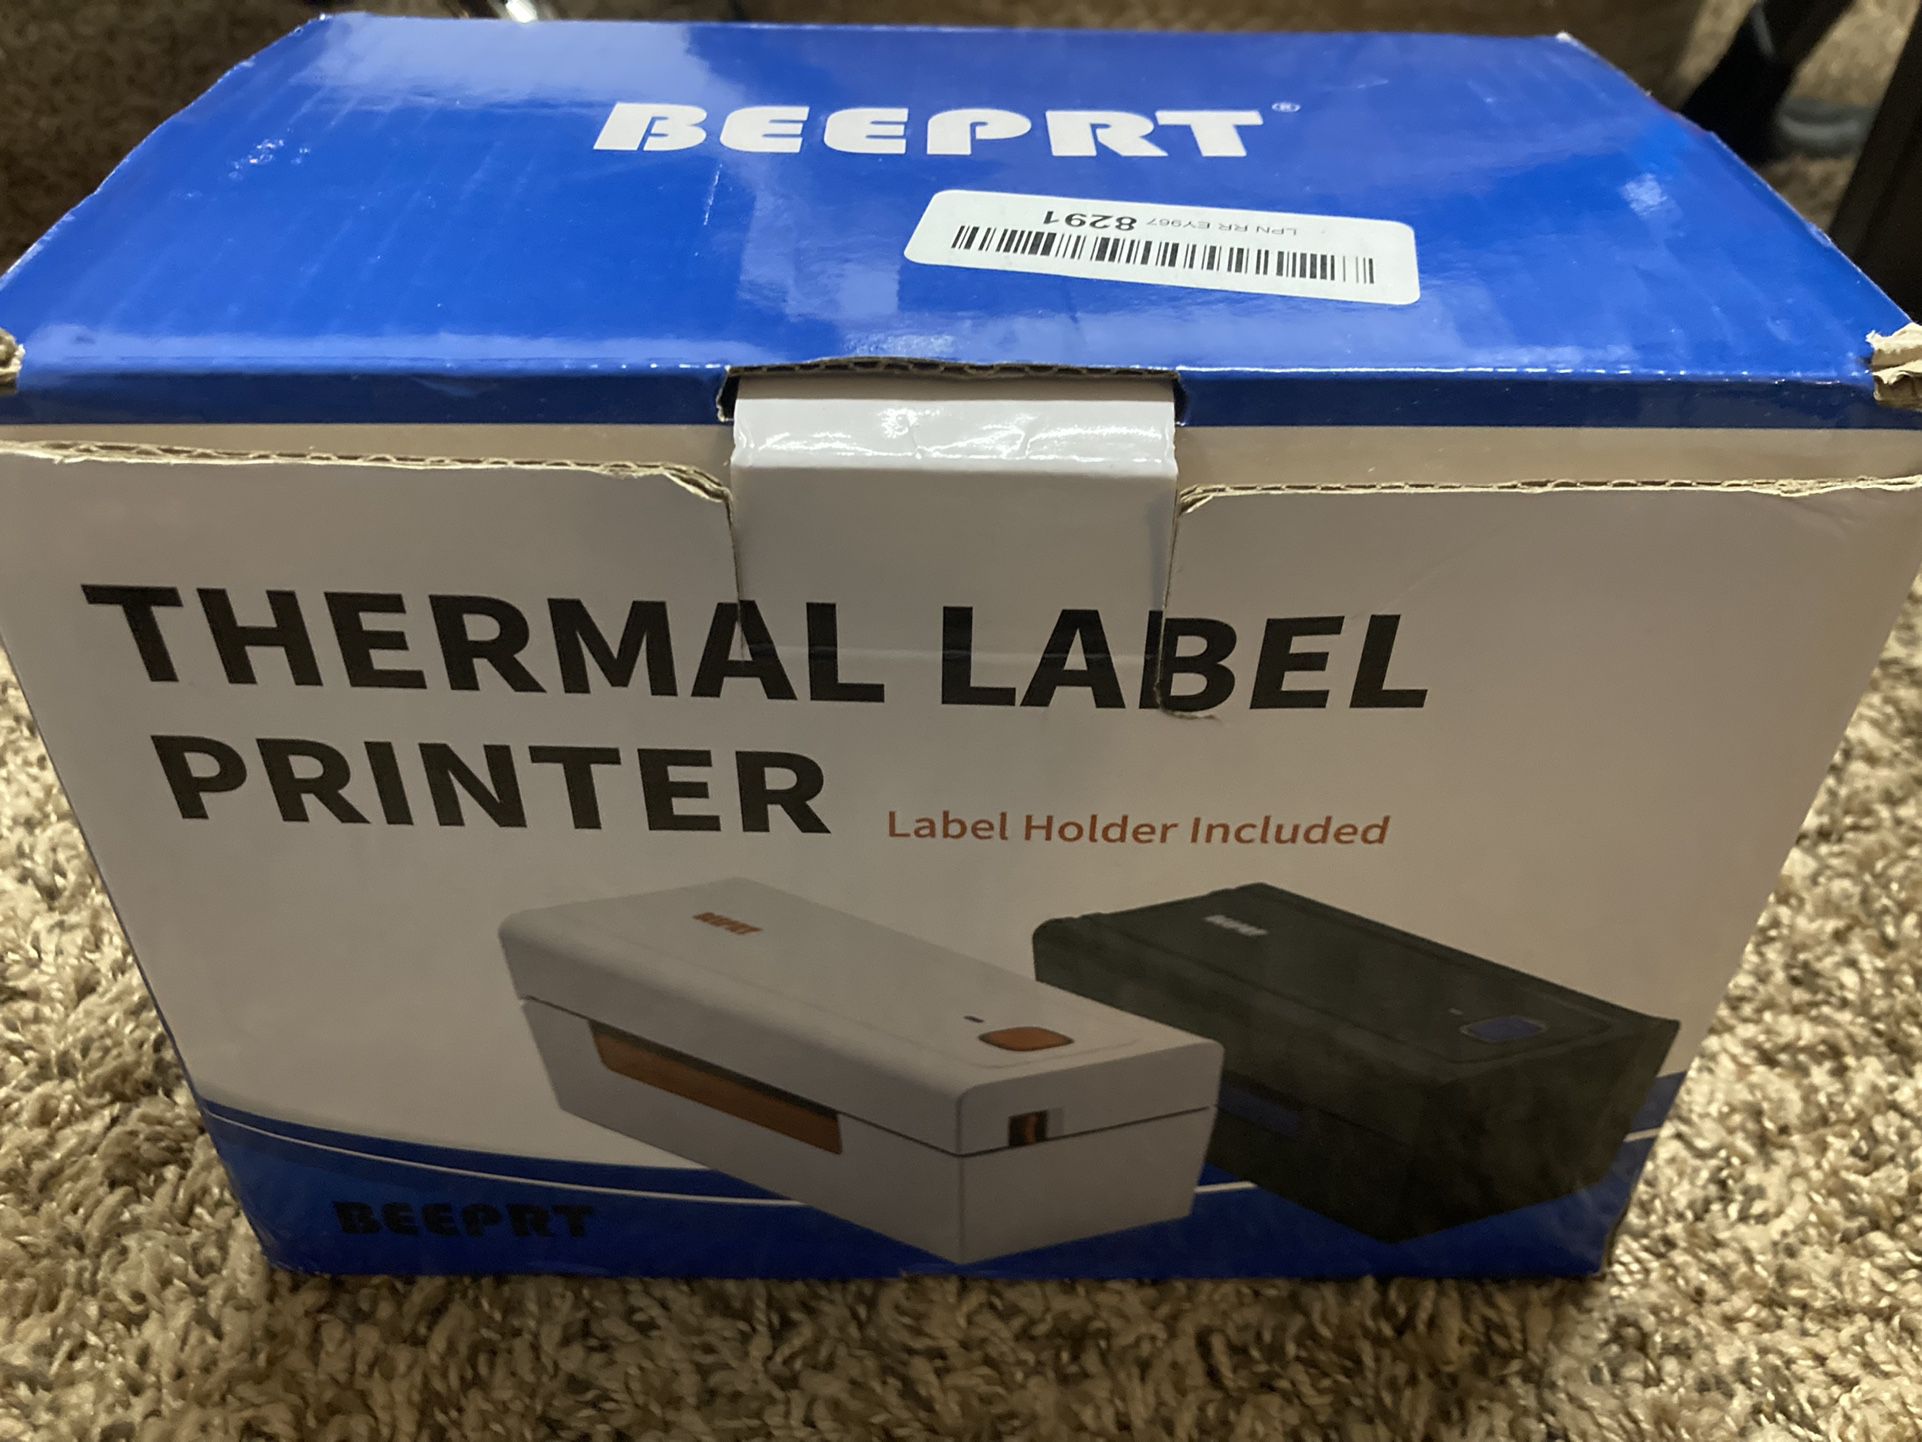 BEEPRR Bluetooth Shipping Label Printer - Wireless 4x6 Thermal Label Printer for Shipping Packages